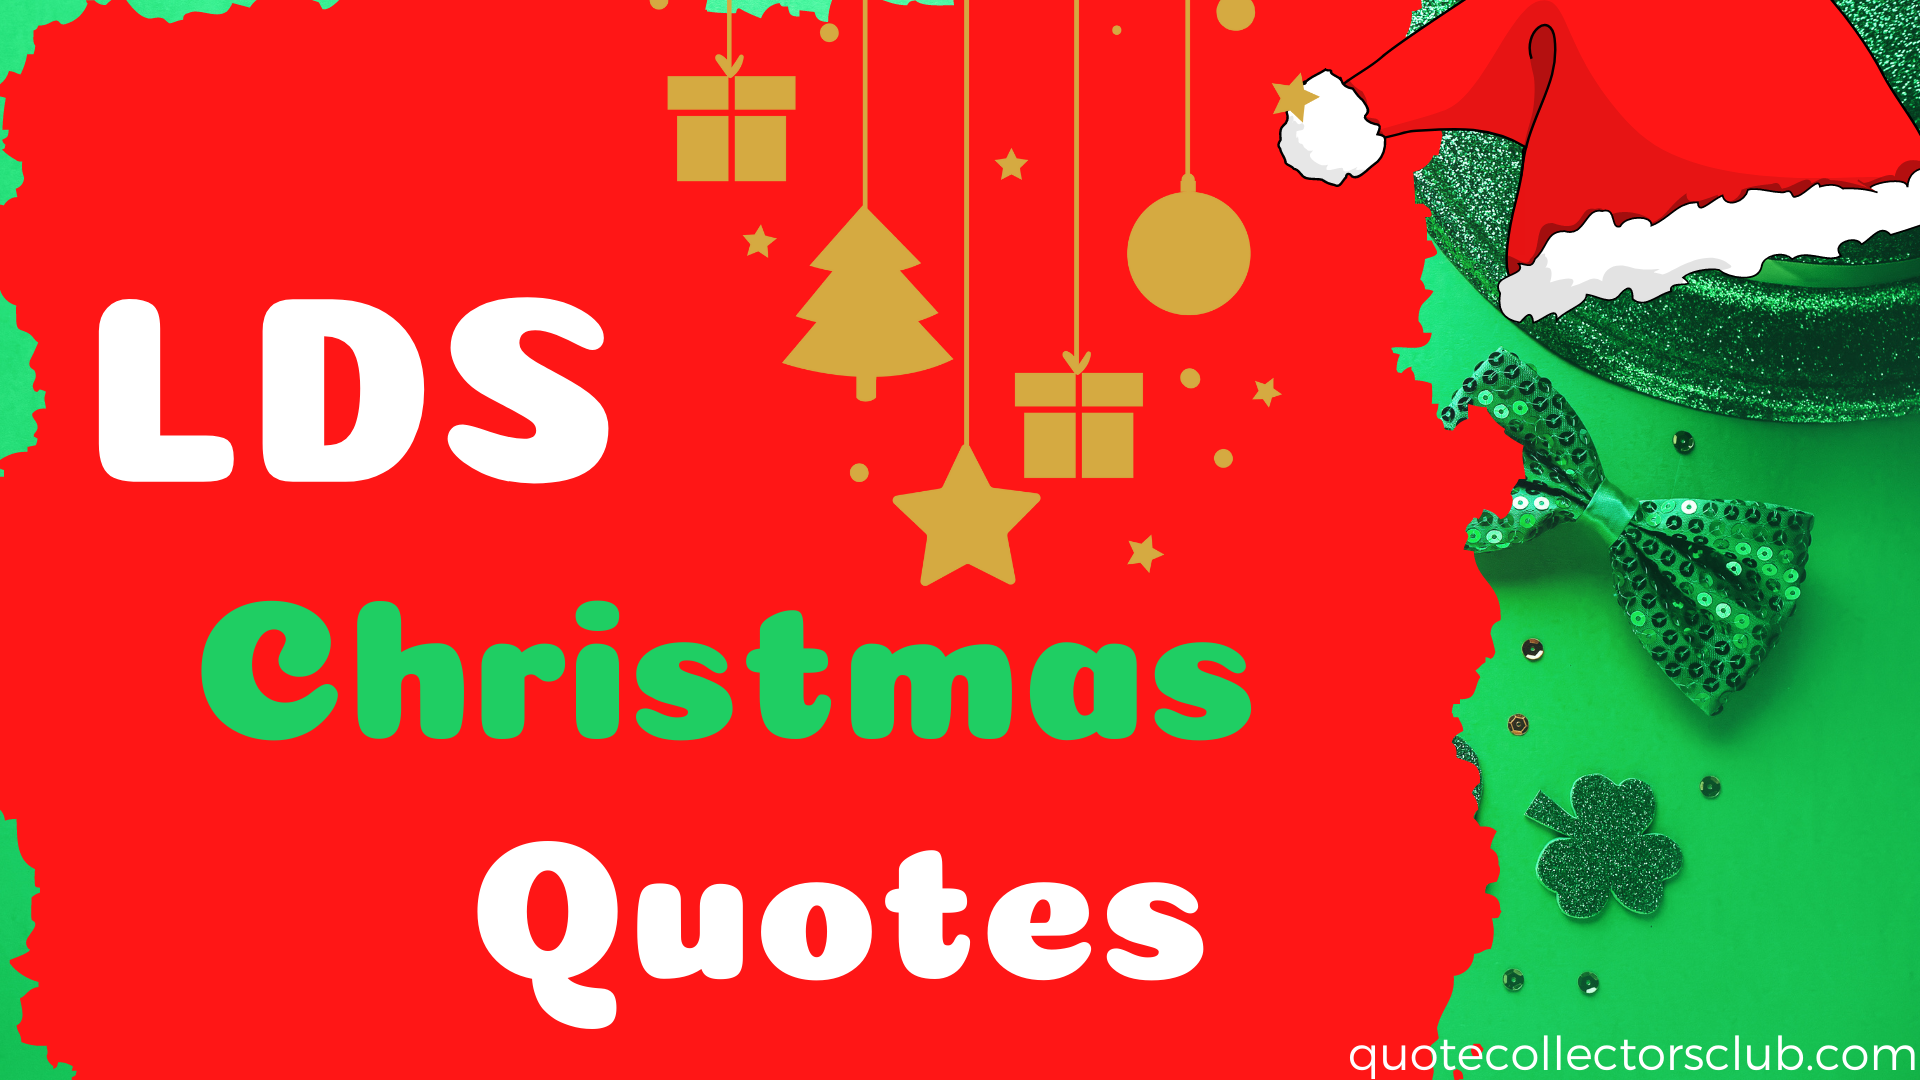 22 LDS Christmas Quotes to Get You in the Holiday Spirit Quote